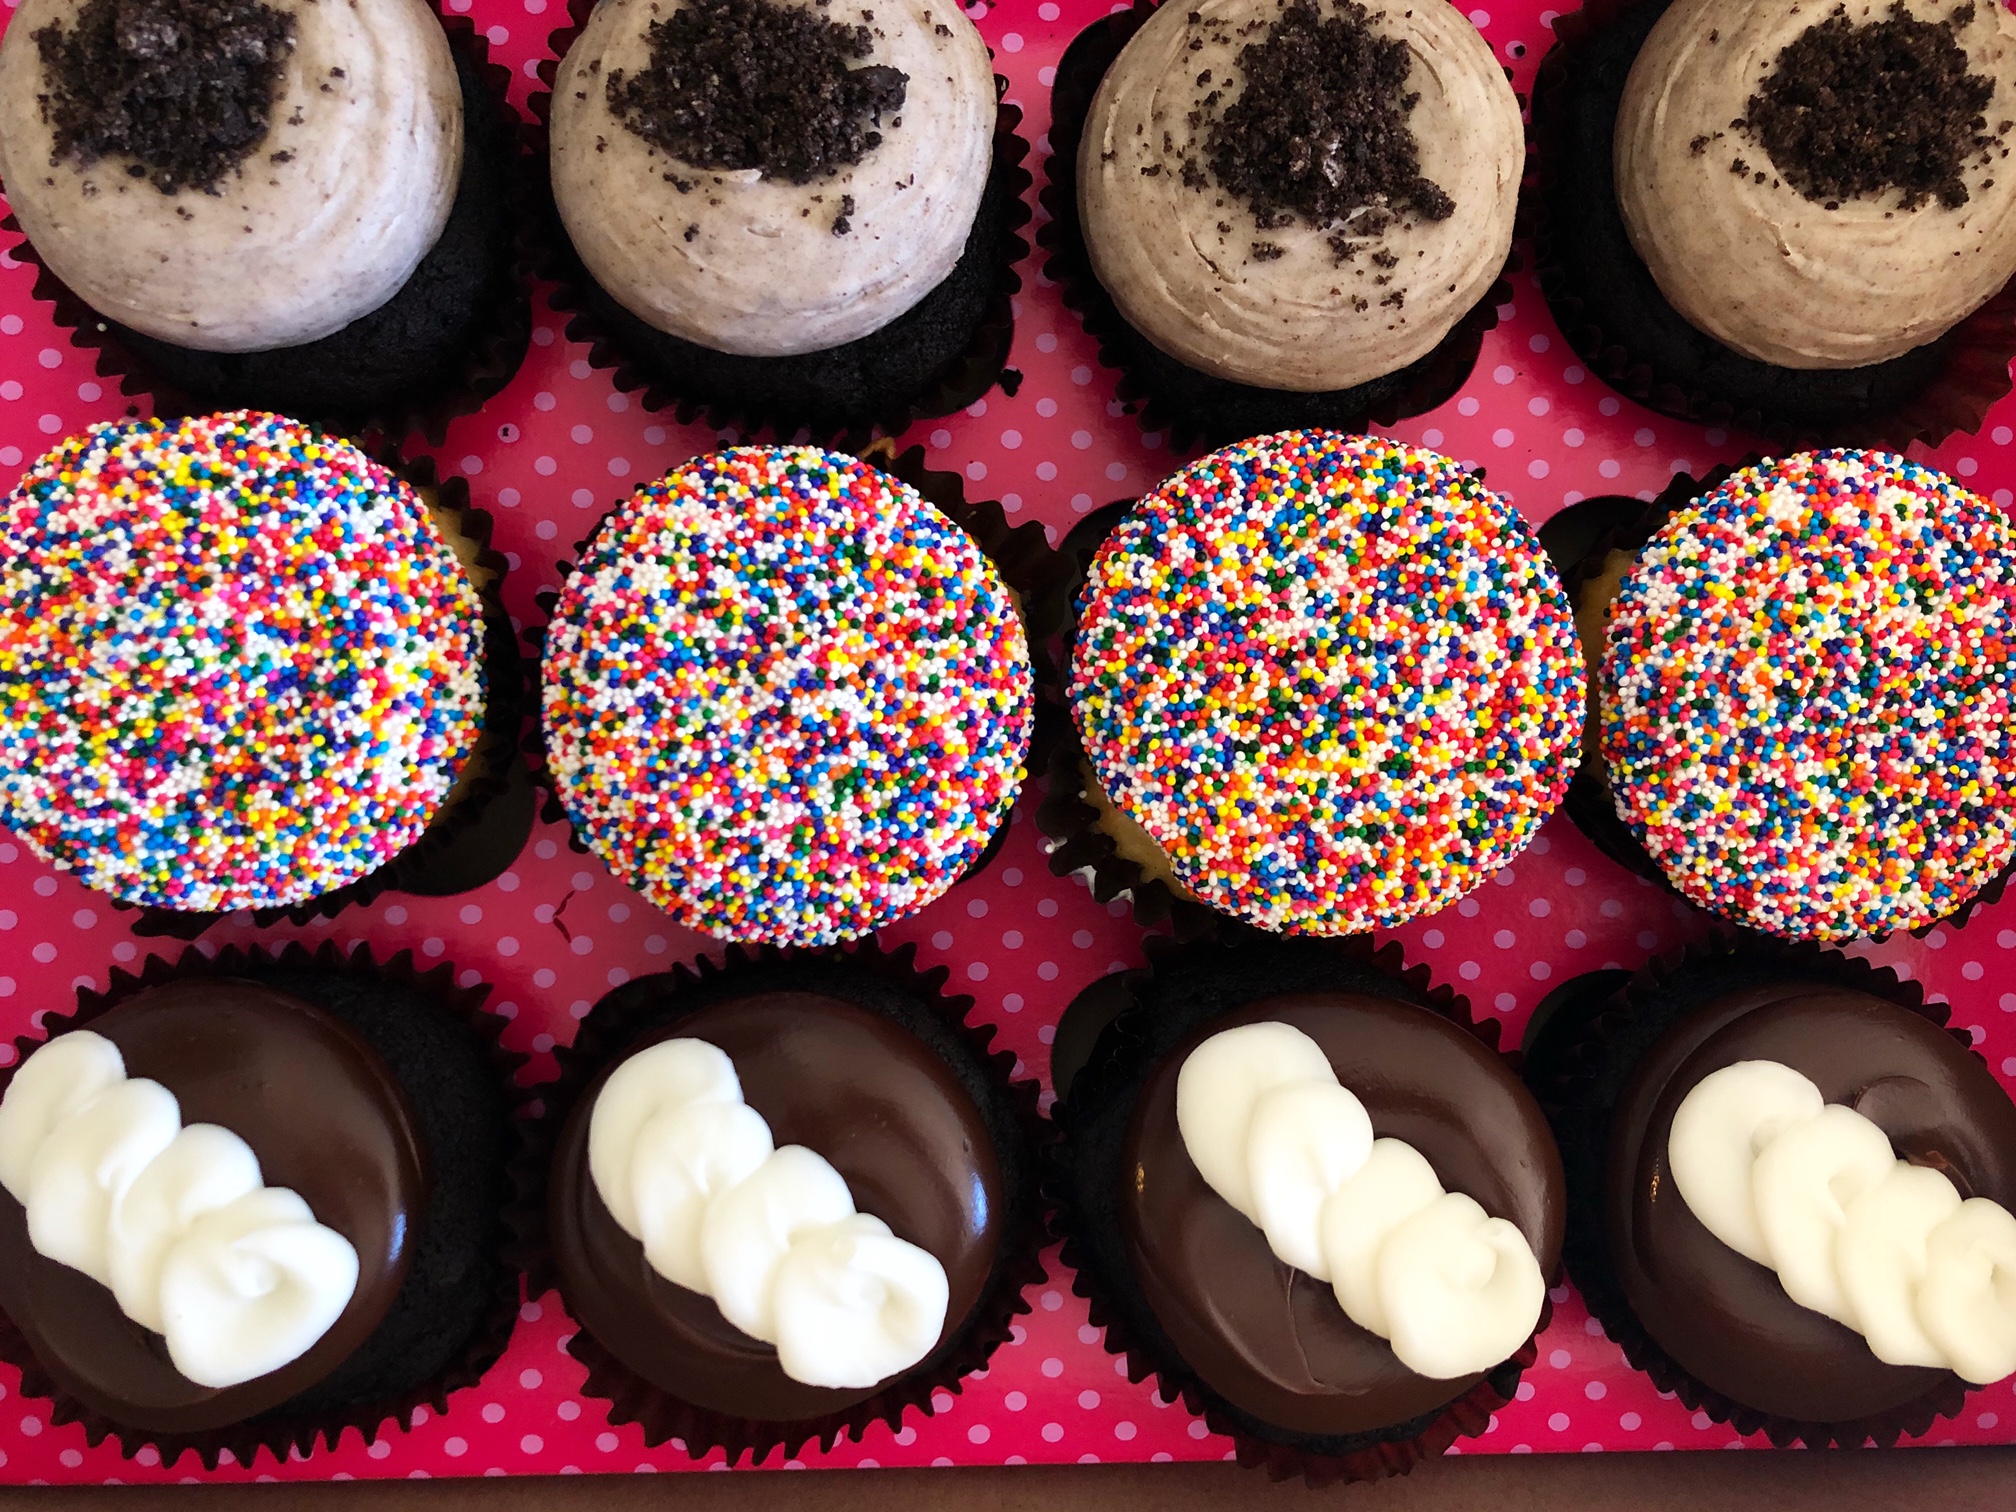 In a pink box, twelve cupcakes are lined up in three rows of four. The top row has gray frosting with black cookie crumbles. The middle row has white frosting with rainbow sprinkles, and the bottom row has black fudge frosting with a white diagonal line of frosting on top. Photo by Alyssa Buckley.